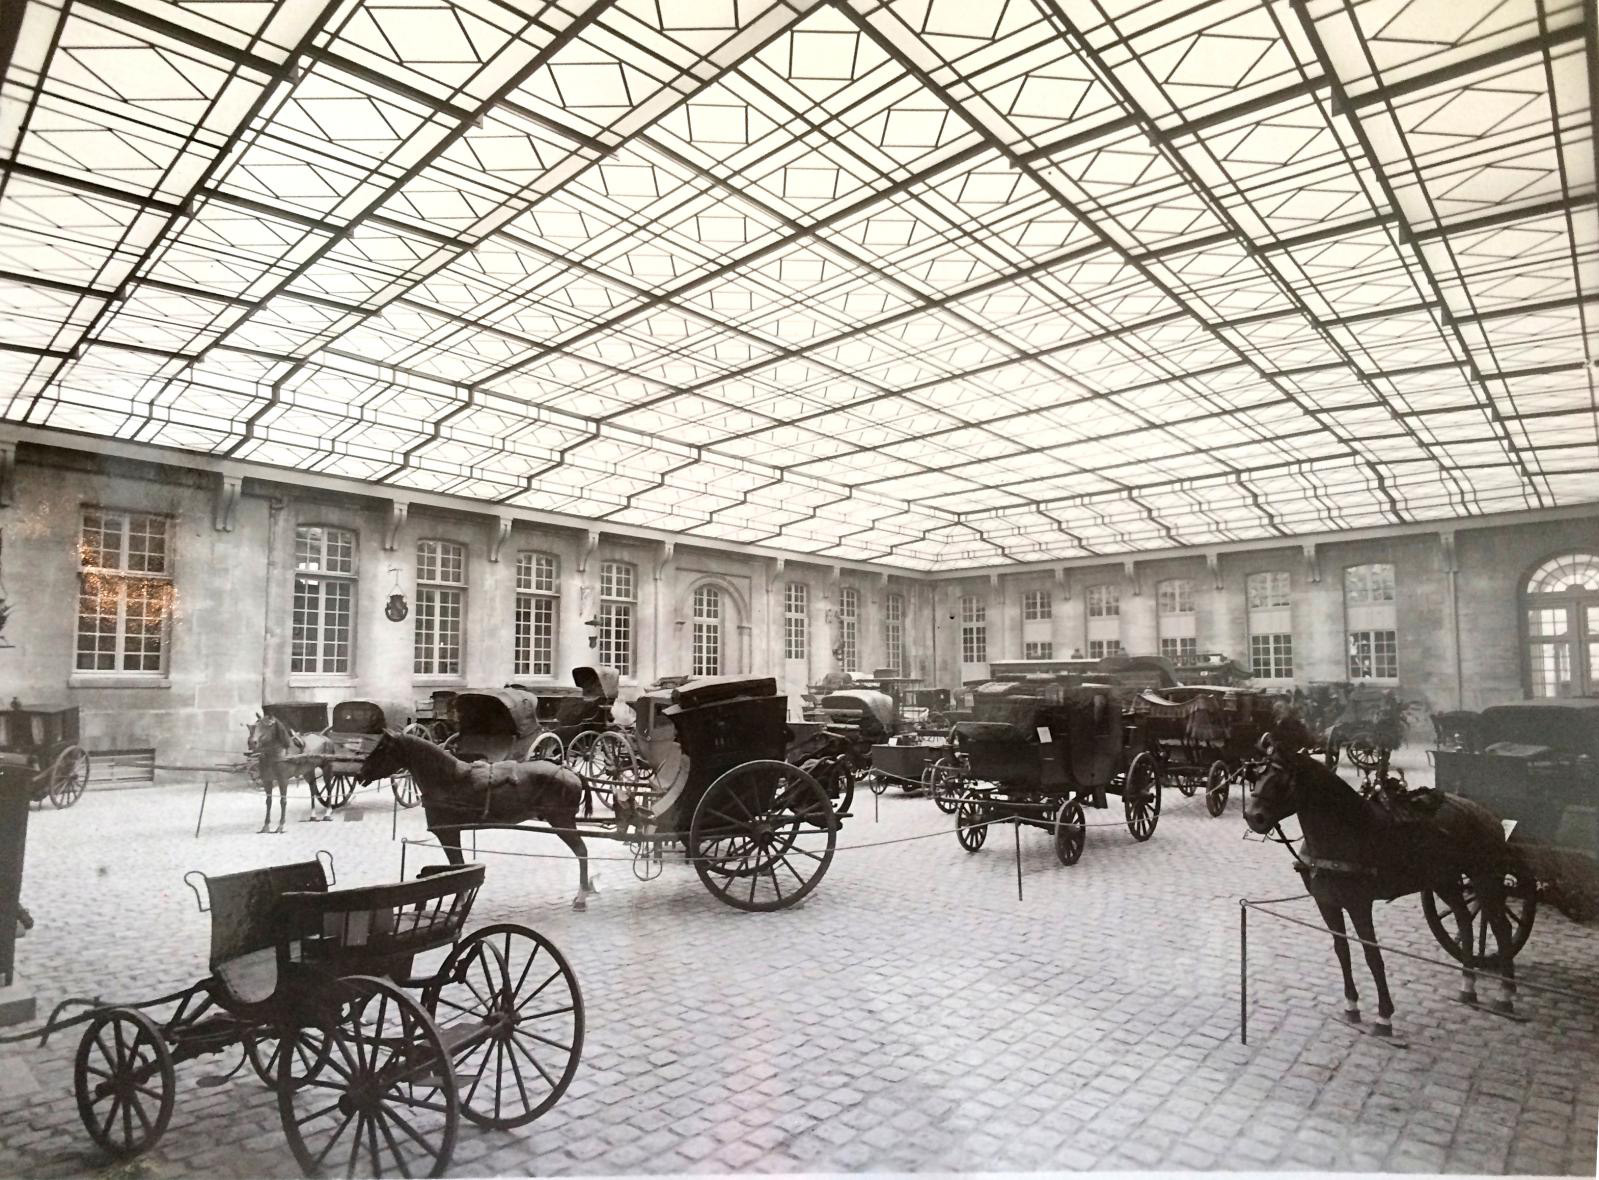 The glass roof of the National Car and Tourism Museum.